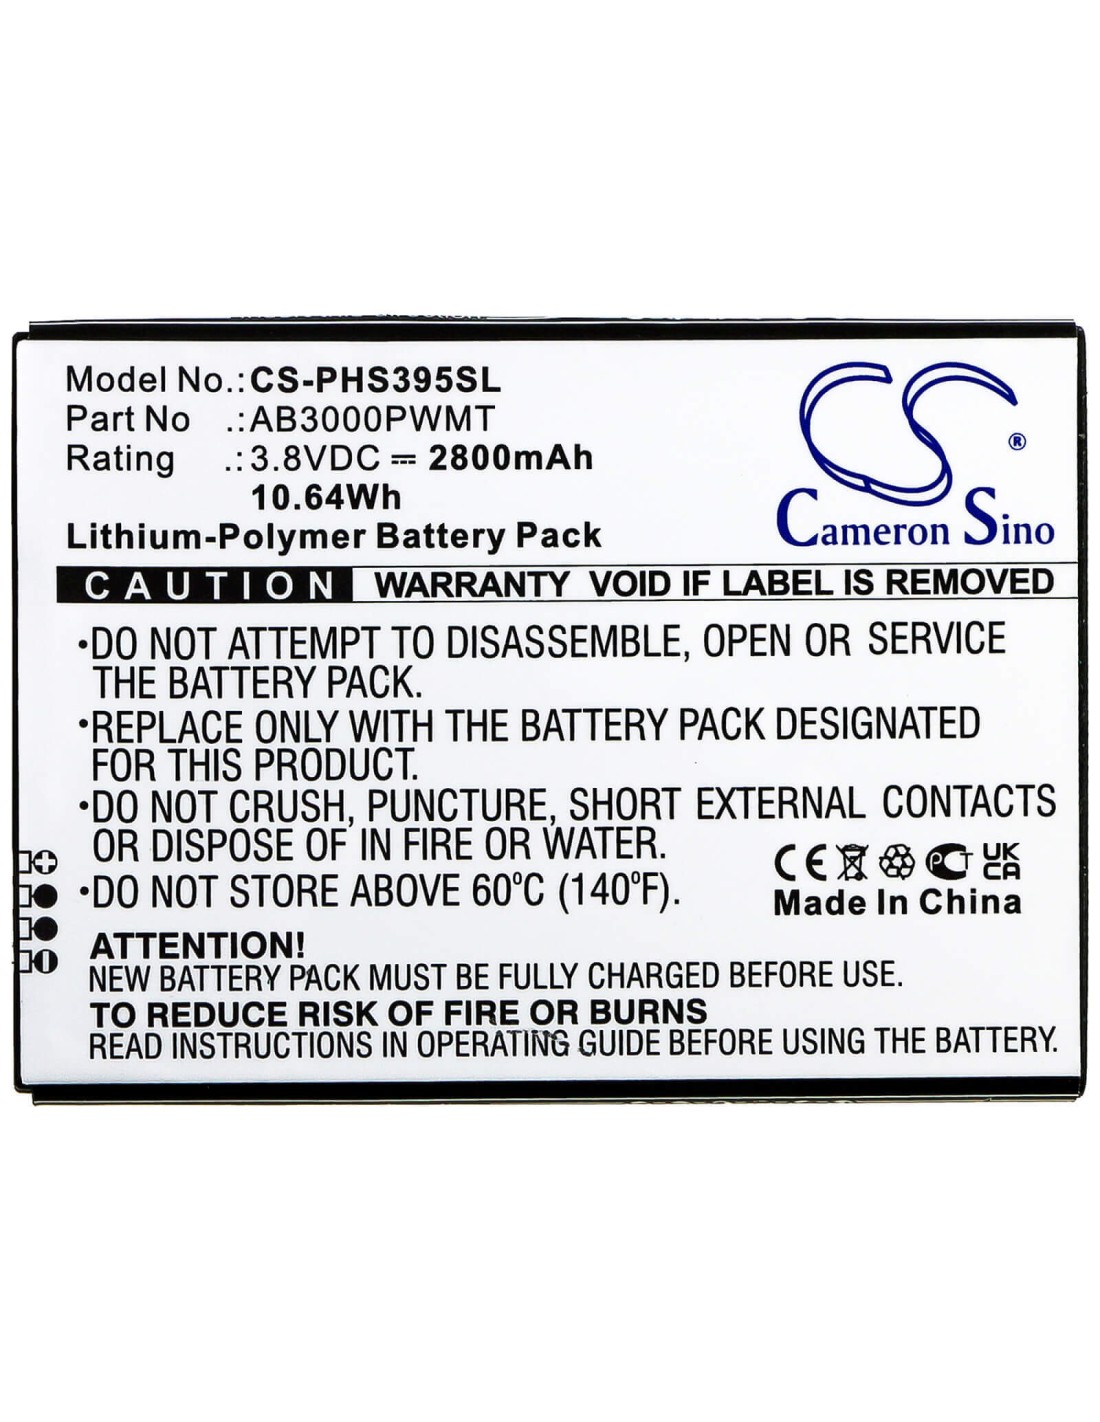 Battery for Philips, Cts395, Xenium S395 3.8V, 2800mAh - 10.64Wh